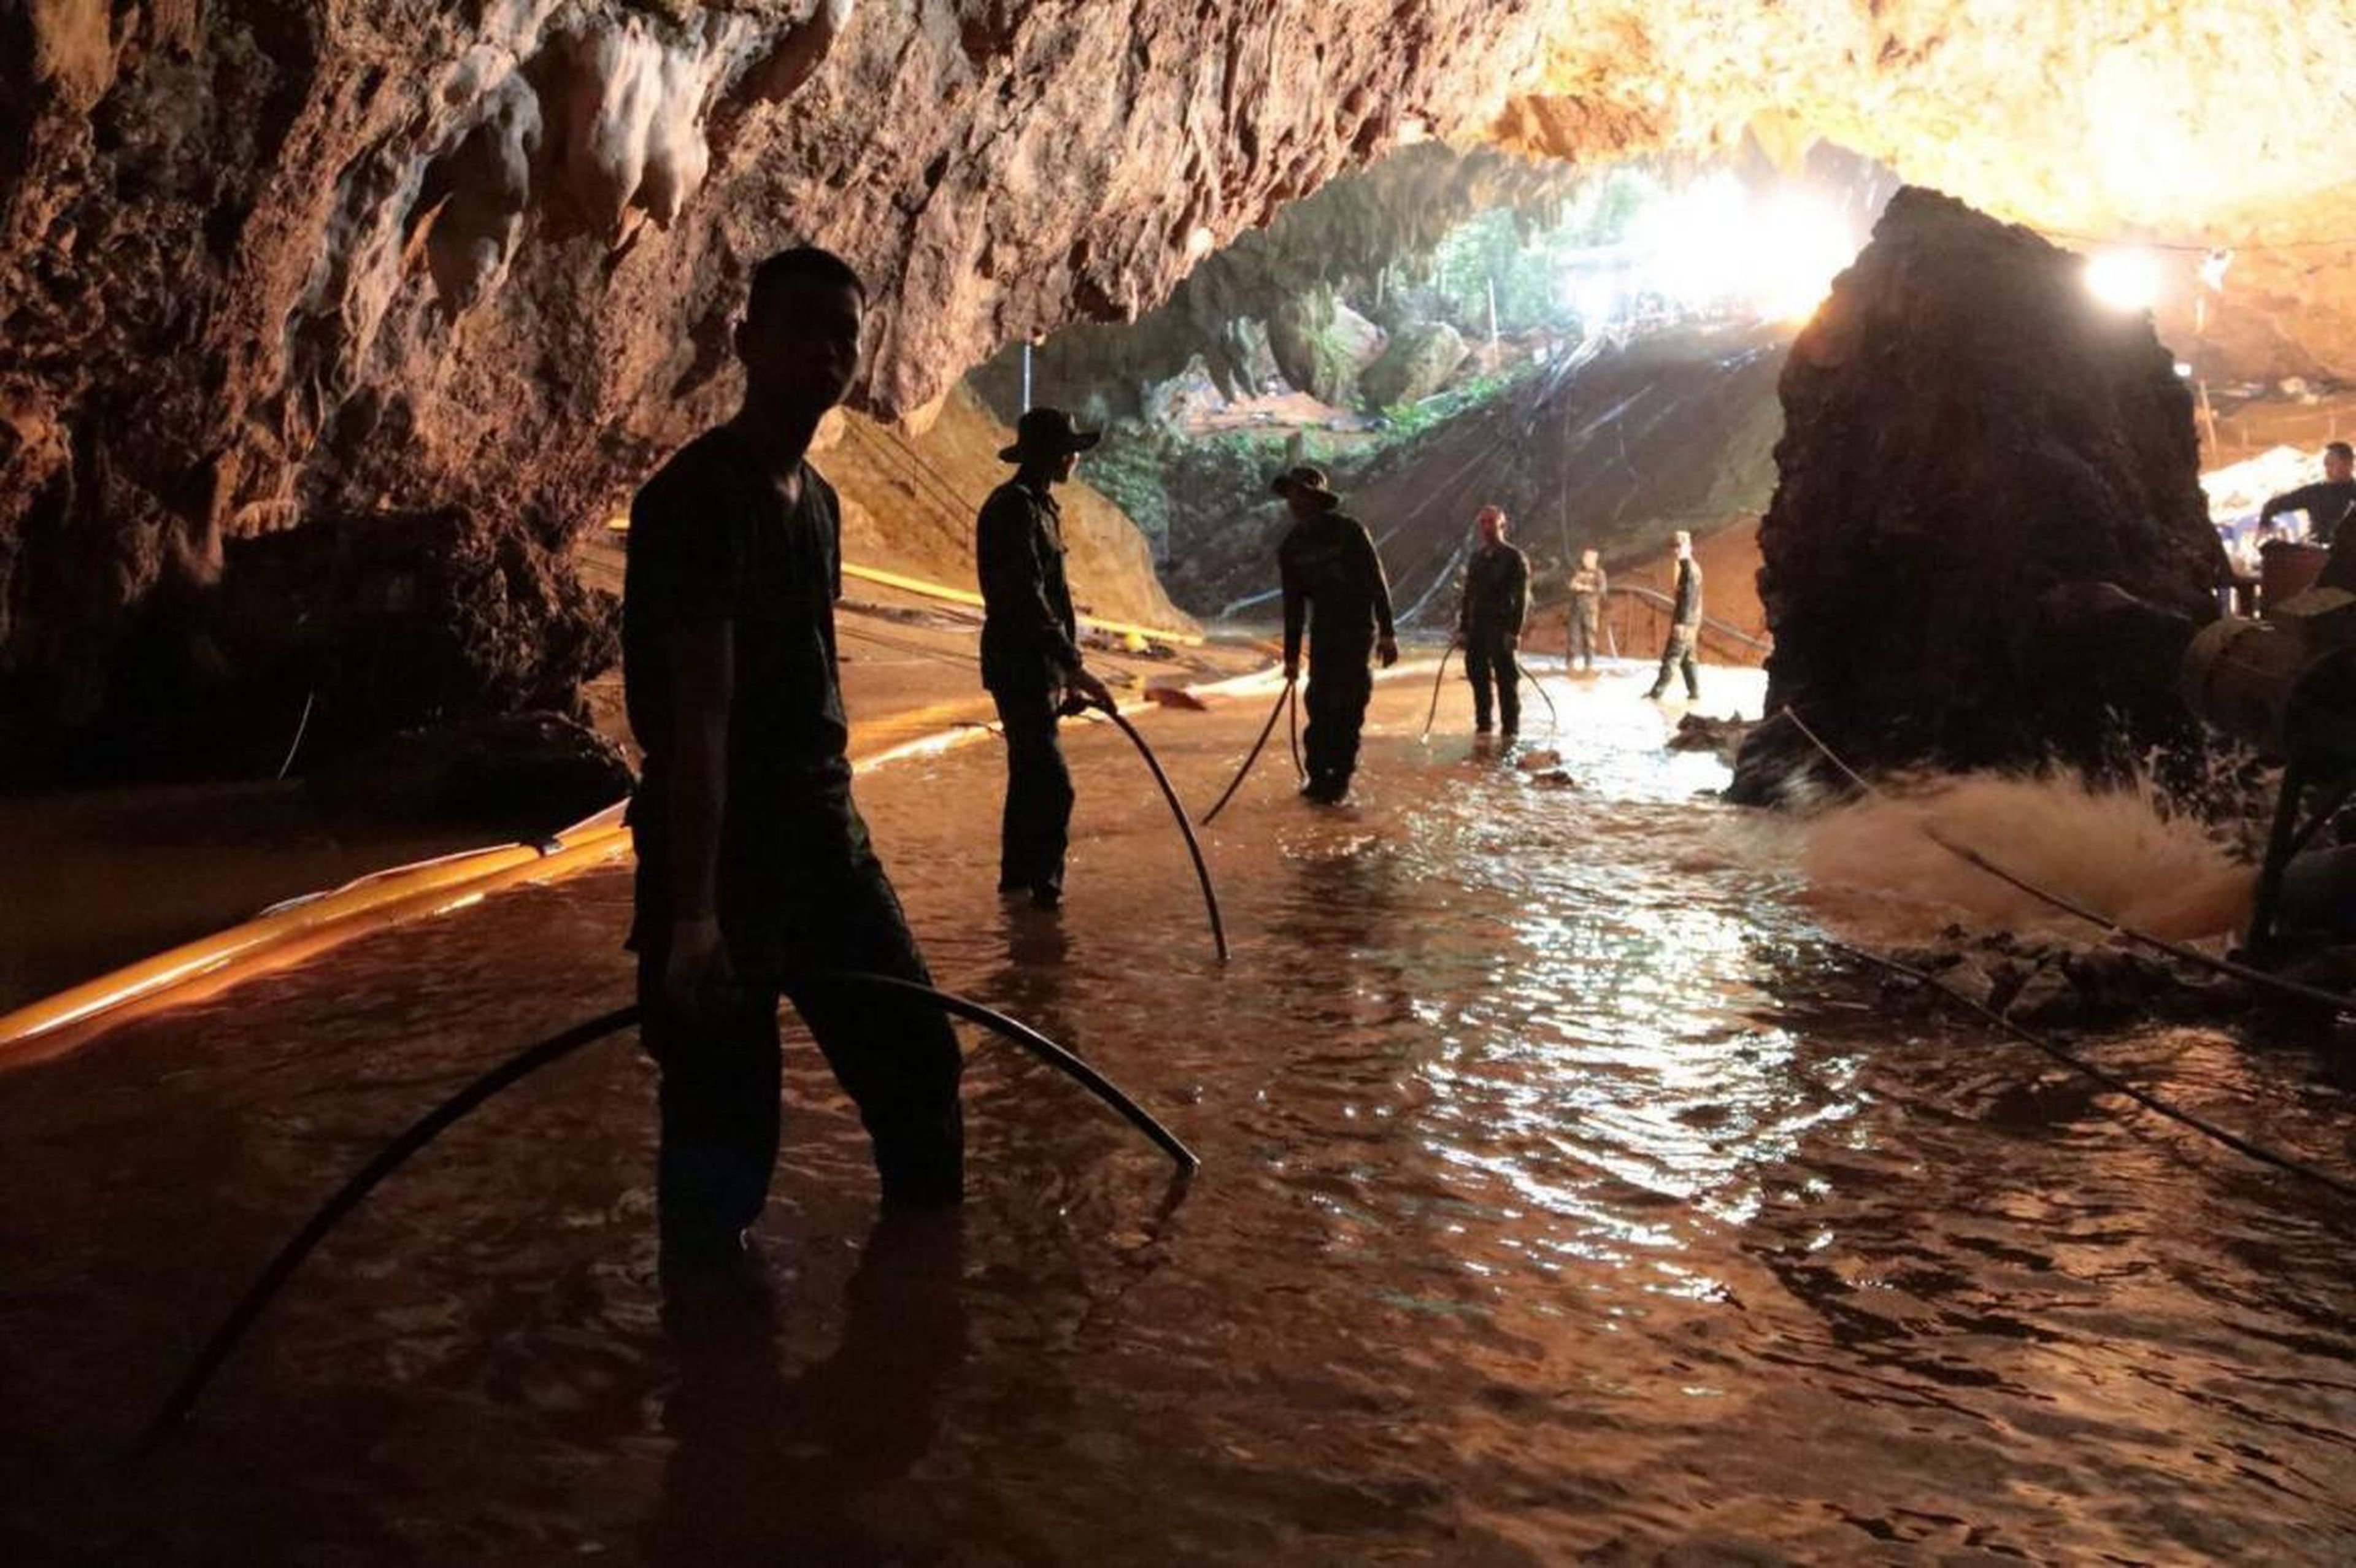 Thai rescue teams arrange a water pumping system at the entrance to a flooded cave complex where 12 boys and their soccer coach were trapped.